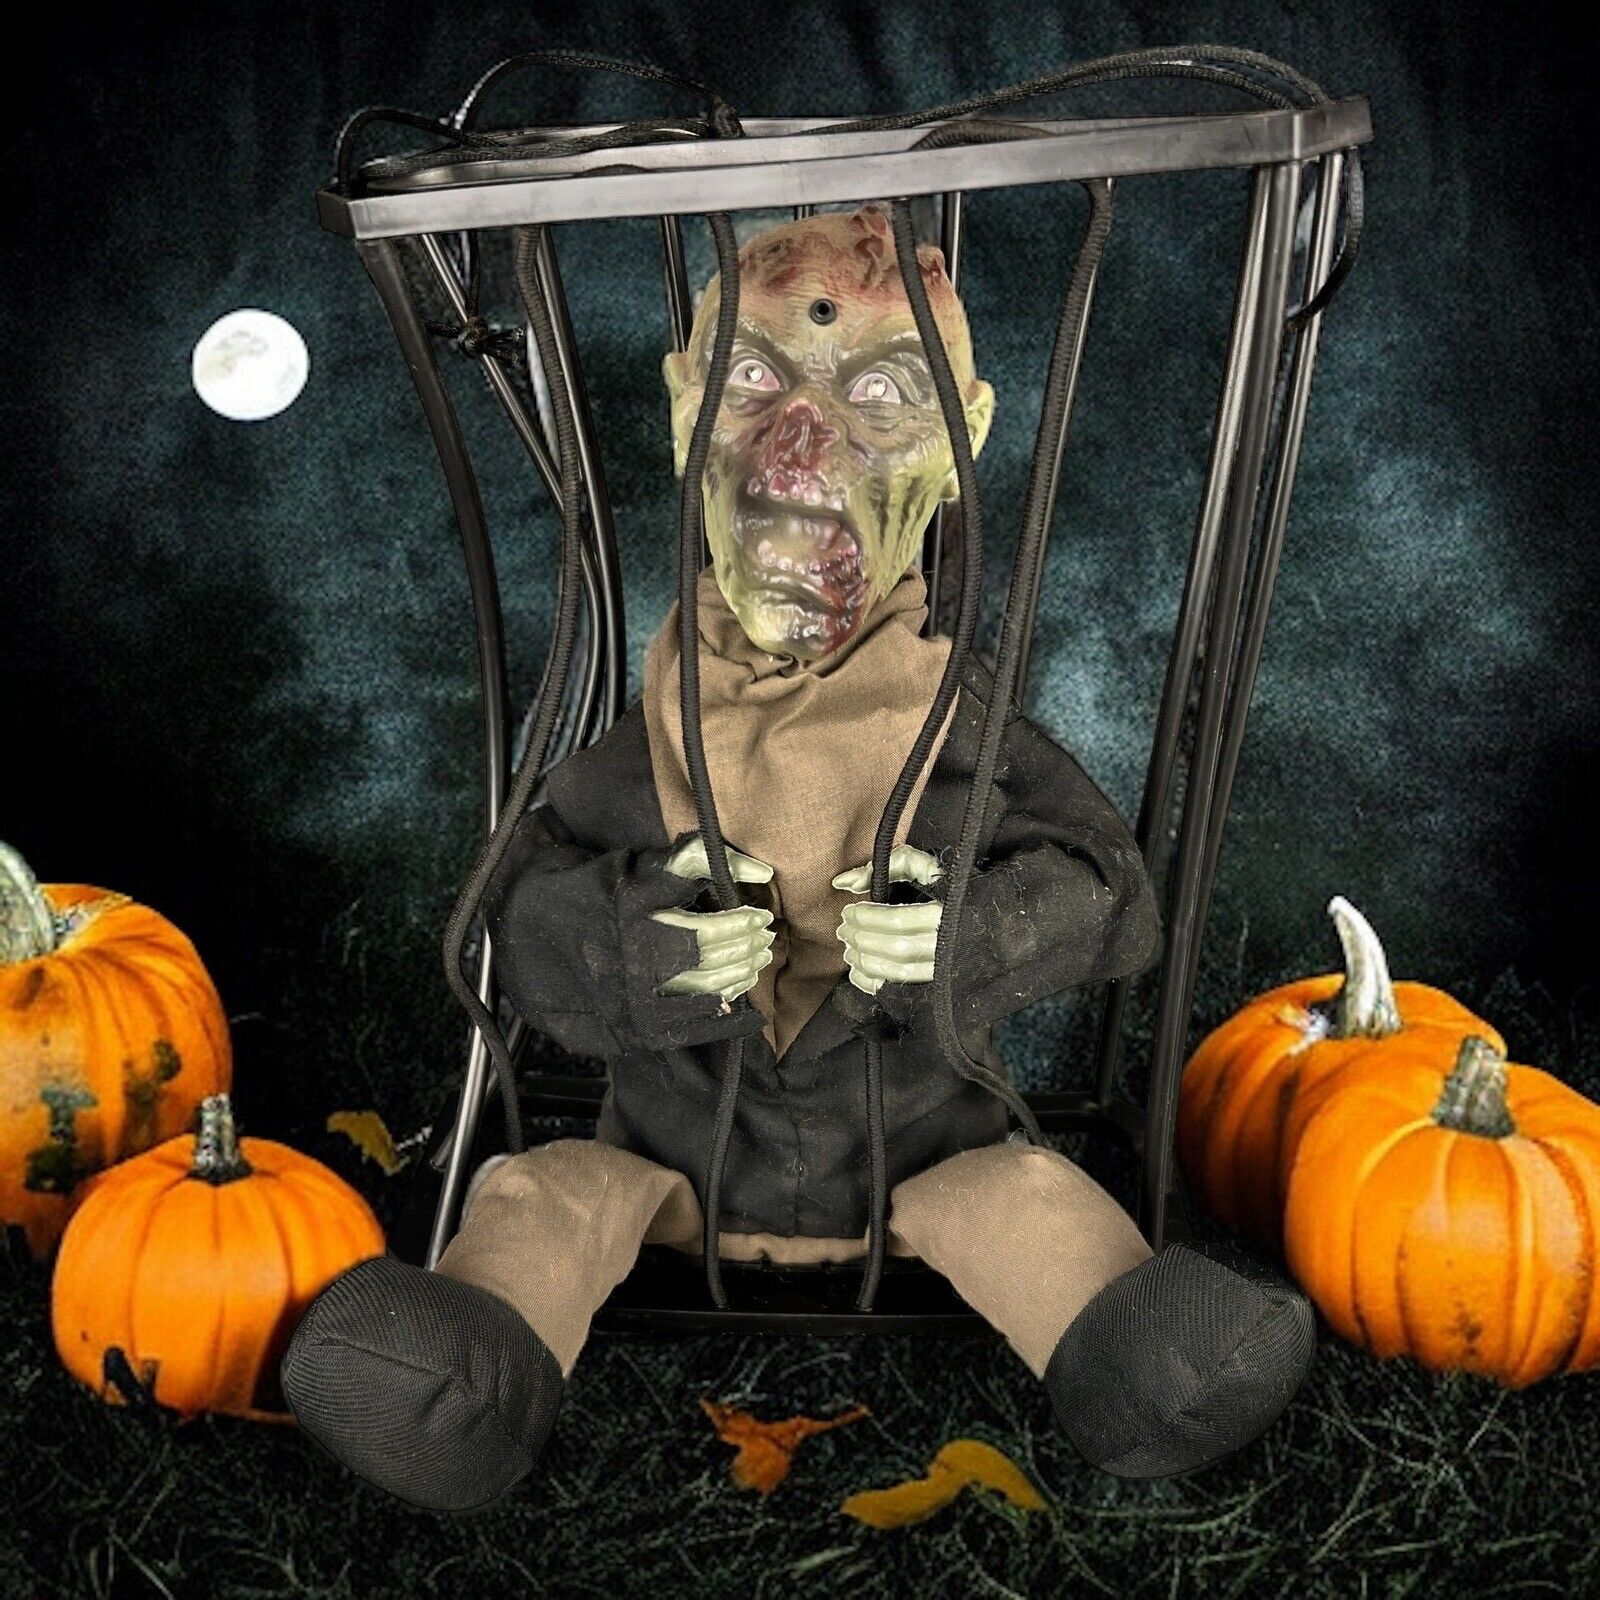 2009 MAGIC POWER MOTION ACTIVATED ANIMATED ZOMBIE IN A HANGING CAGE HALLOWEEN